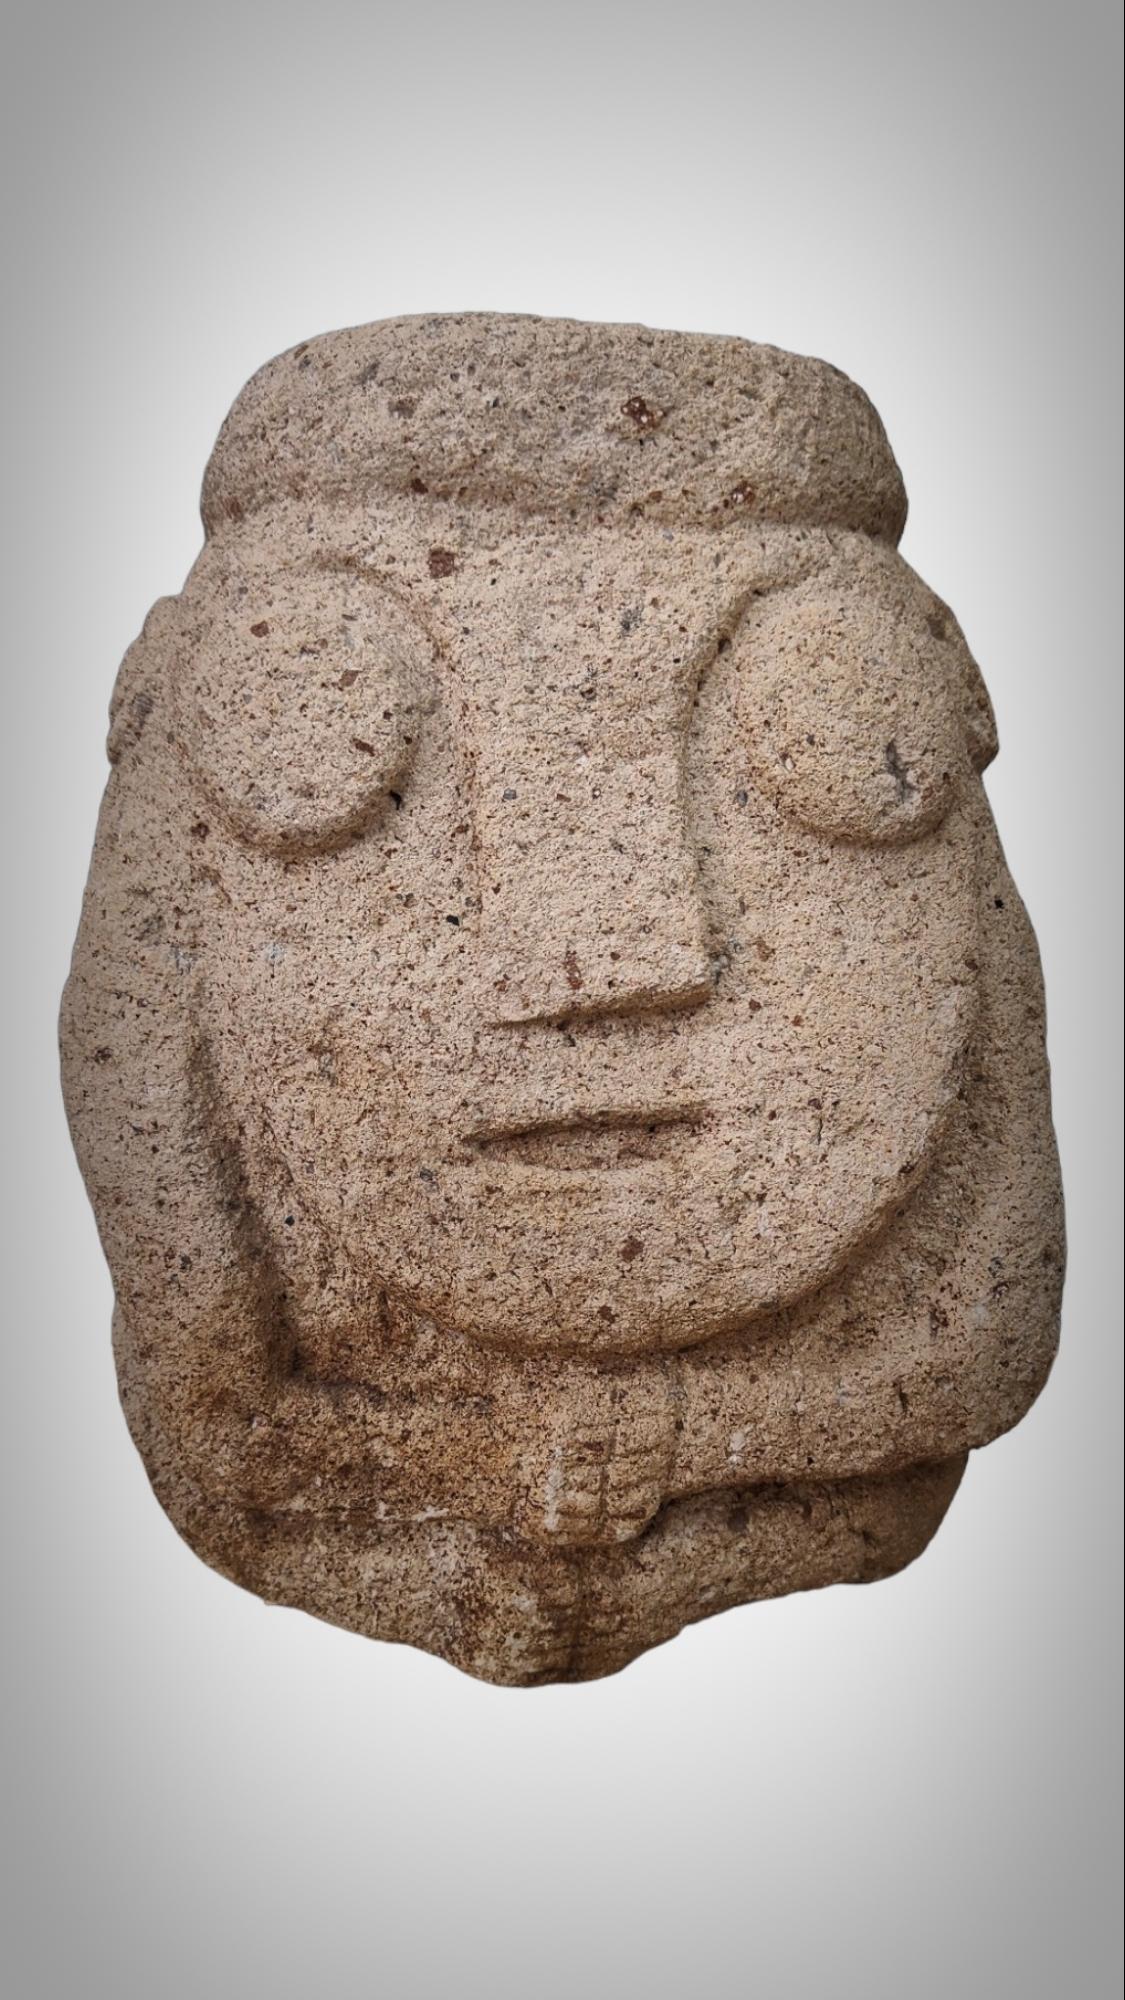 ANTHROPOMORPHIC SCULPTURE CARVED IN STONE OF THE RECUAY CULTURE PERU 400BC-400AC
Recuay is an archaeological culture of Ancient Peru that developed in the Sierra of the current Peruvian department of Áncash between 200 AD. C. until 600 d. C. It